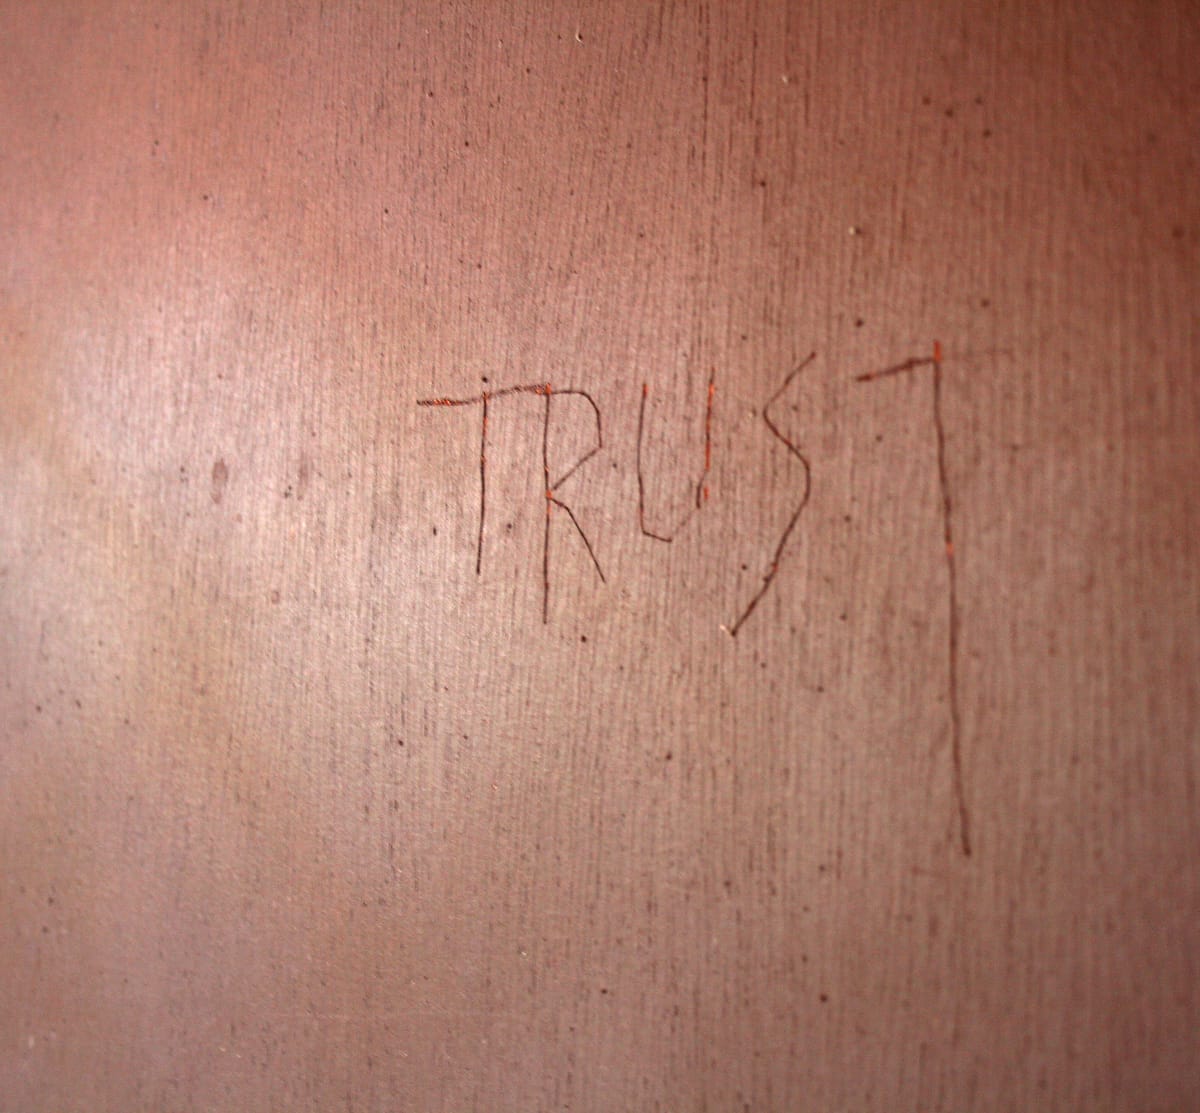 Design for a trust